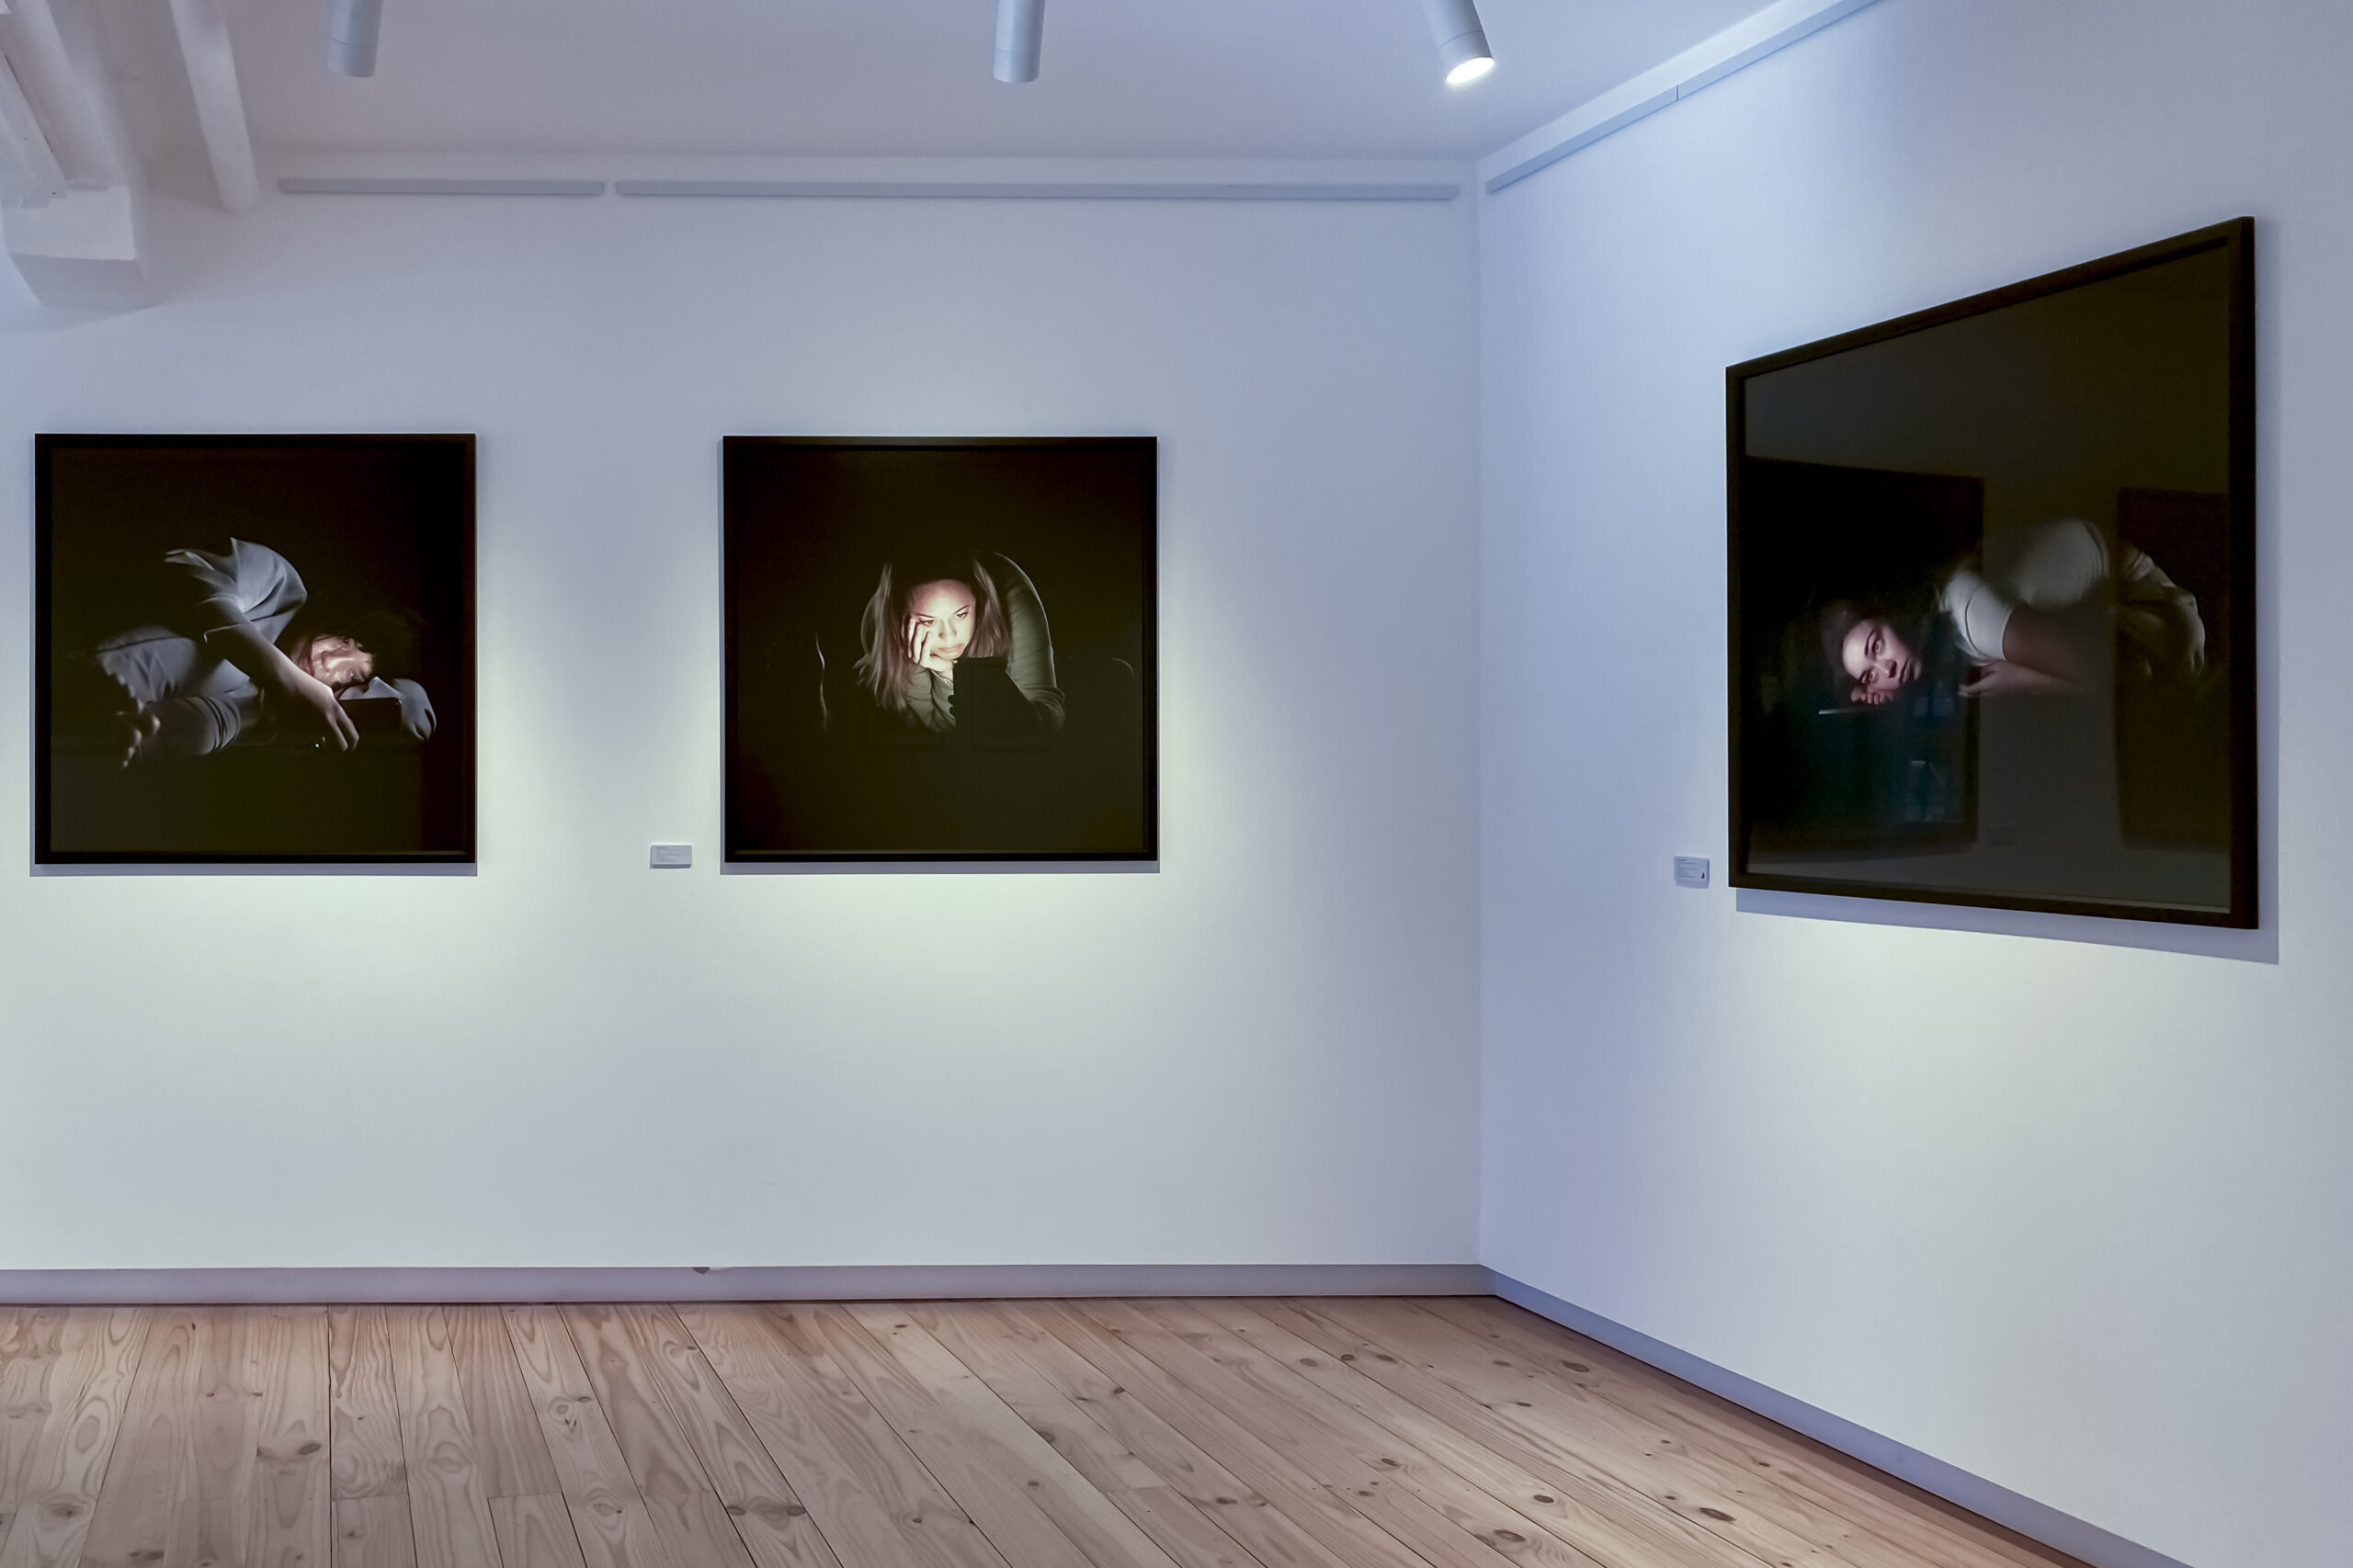 Three large photographs on a white wall. The photographs depict people illuminated only by the light from their phones